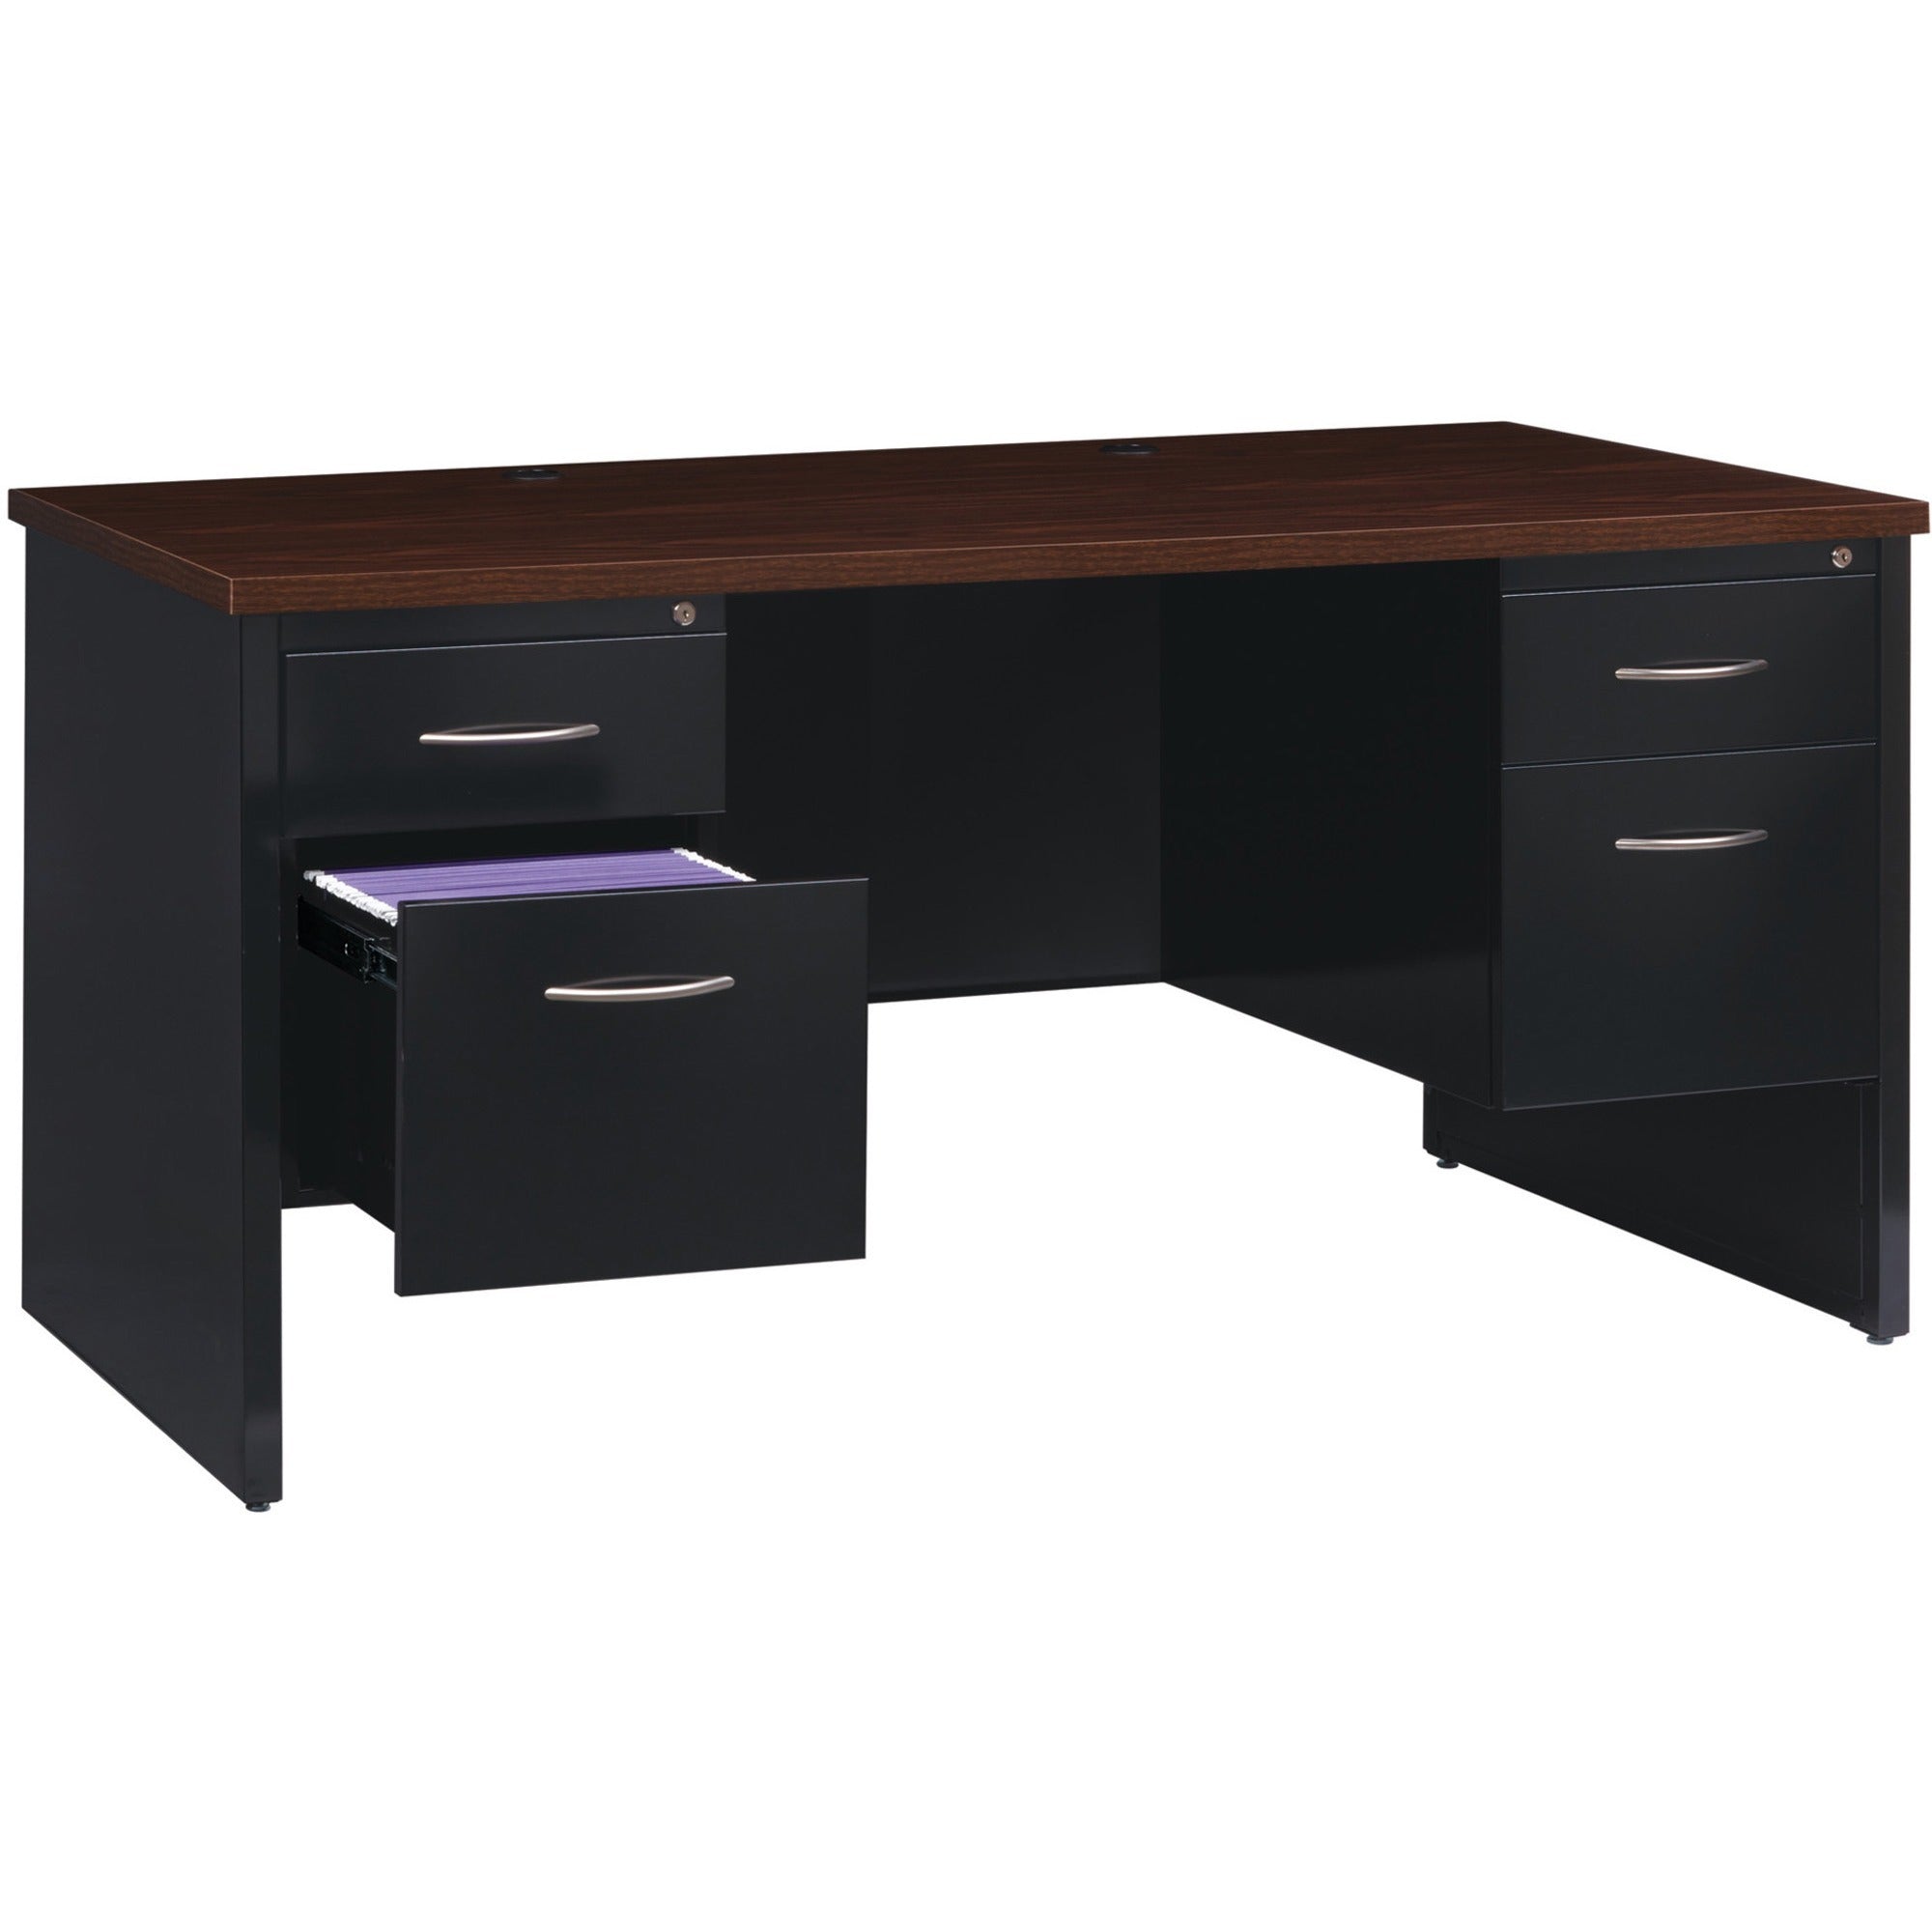 Lorell Fortress Modular Series Double-Pedestal Desk - 60" x 30" , 1.1" Top - 4 x Box, File Drawer(s) - Double Pedestal - Material: Steel - Finish: Walnut Laminate, Black - Scratch Resistant, Stain Resistant, Ball-bearing Suspension, Grommet, Handle, - 